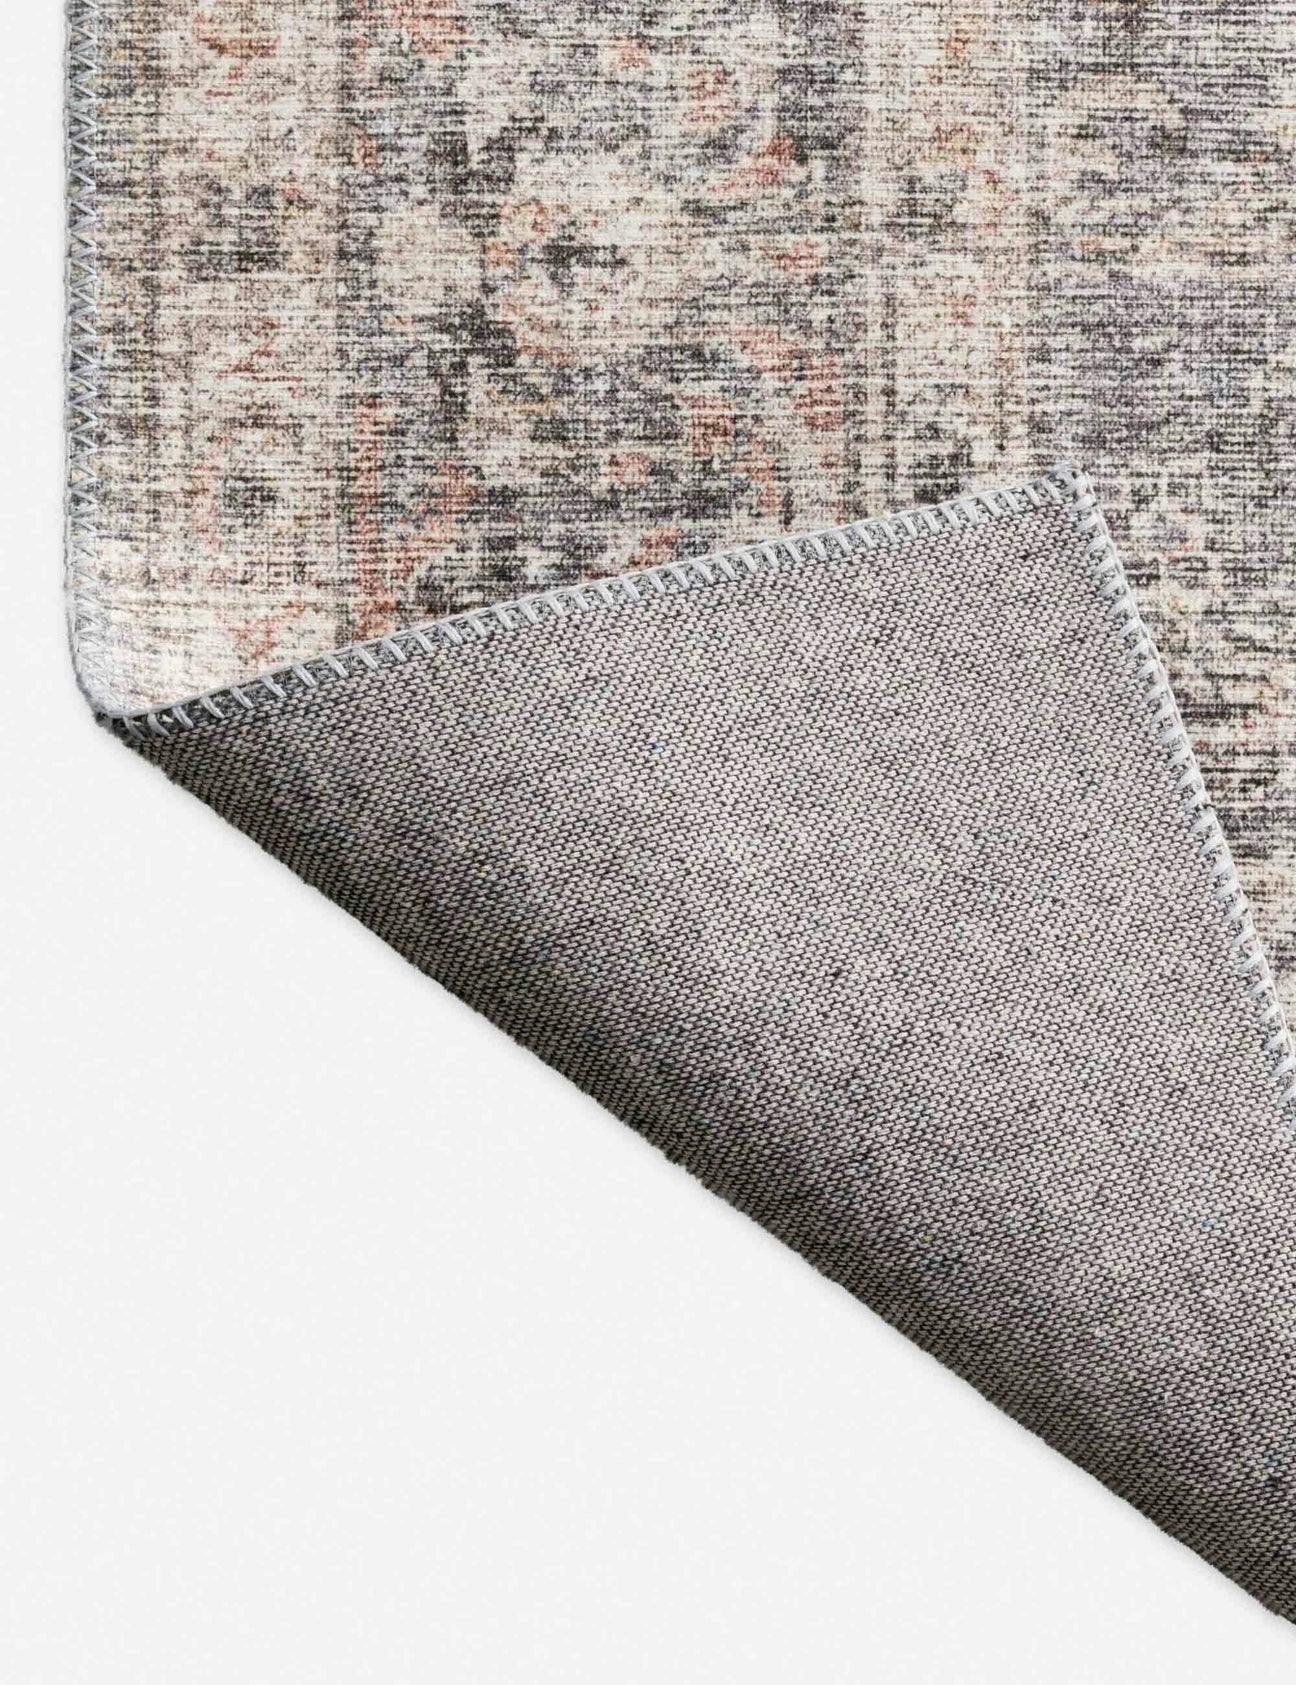 Roze Rug - Grey and Apricot / 3'6" x 5'6"